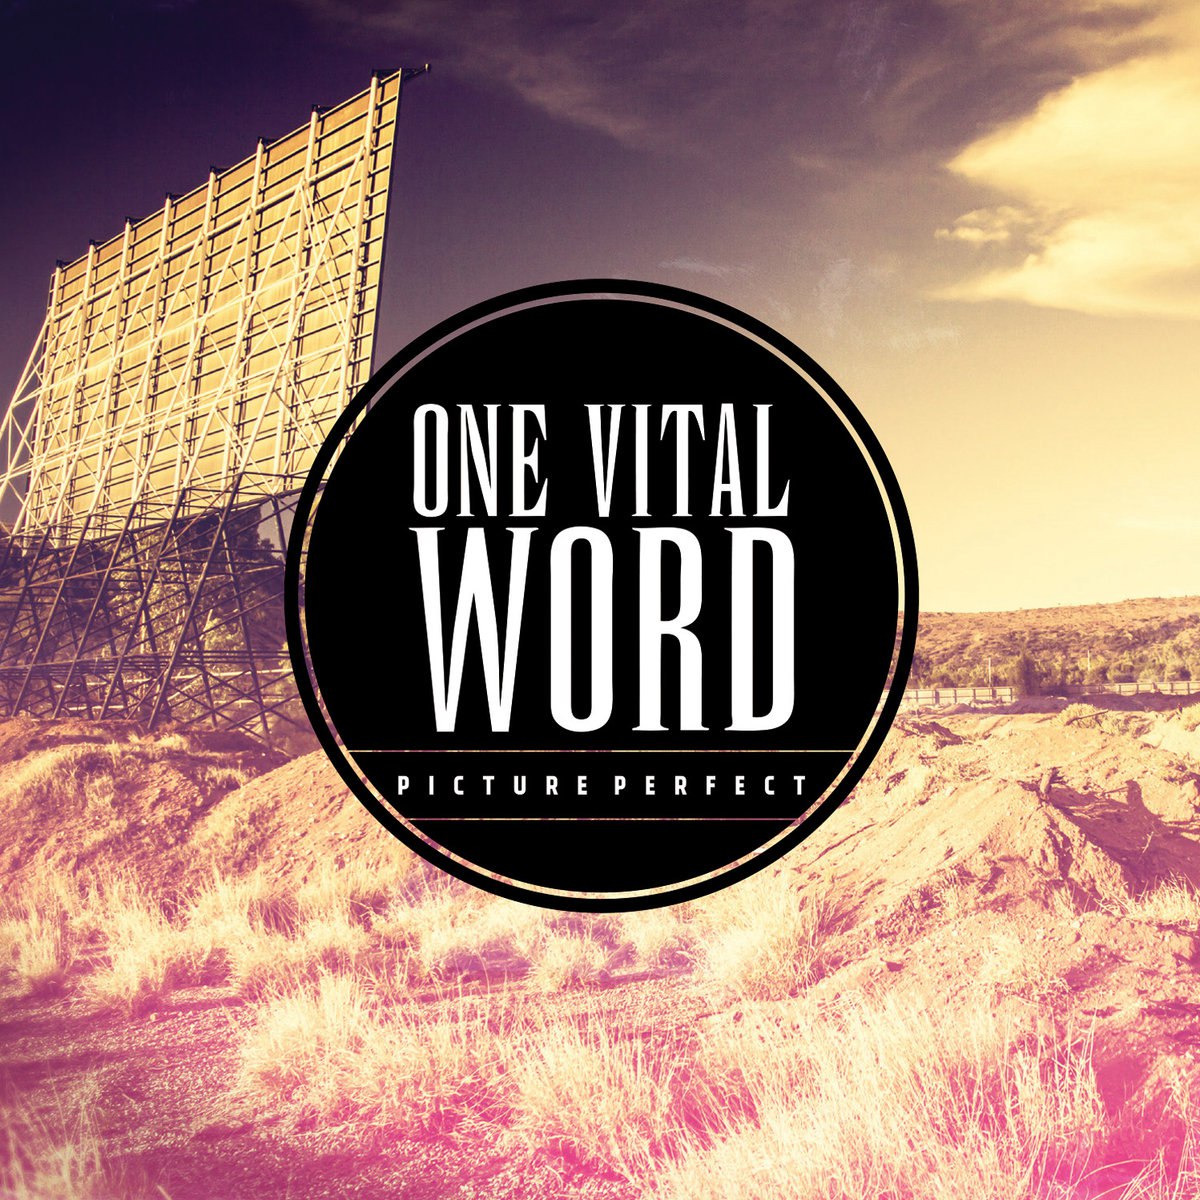 One Vital Word - Picture Perfect (2013)